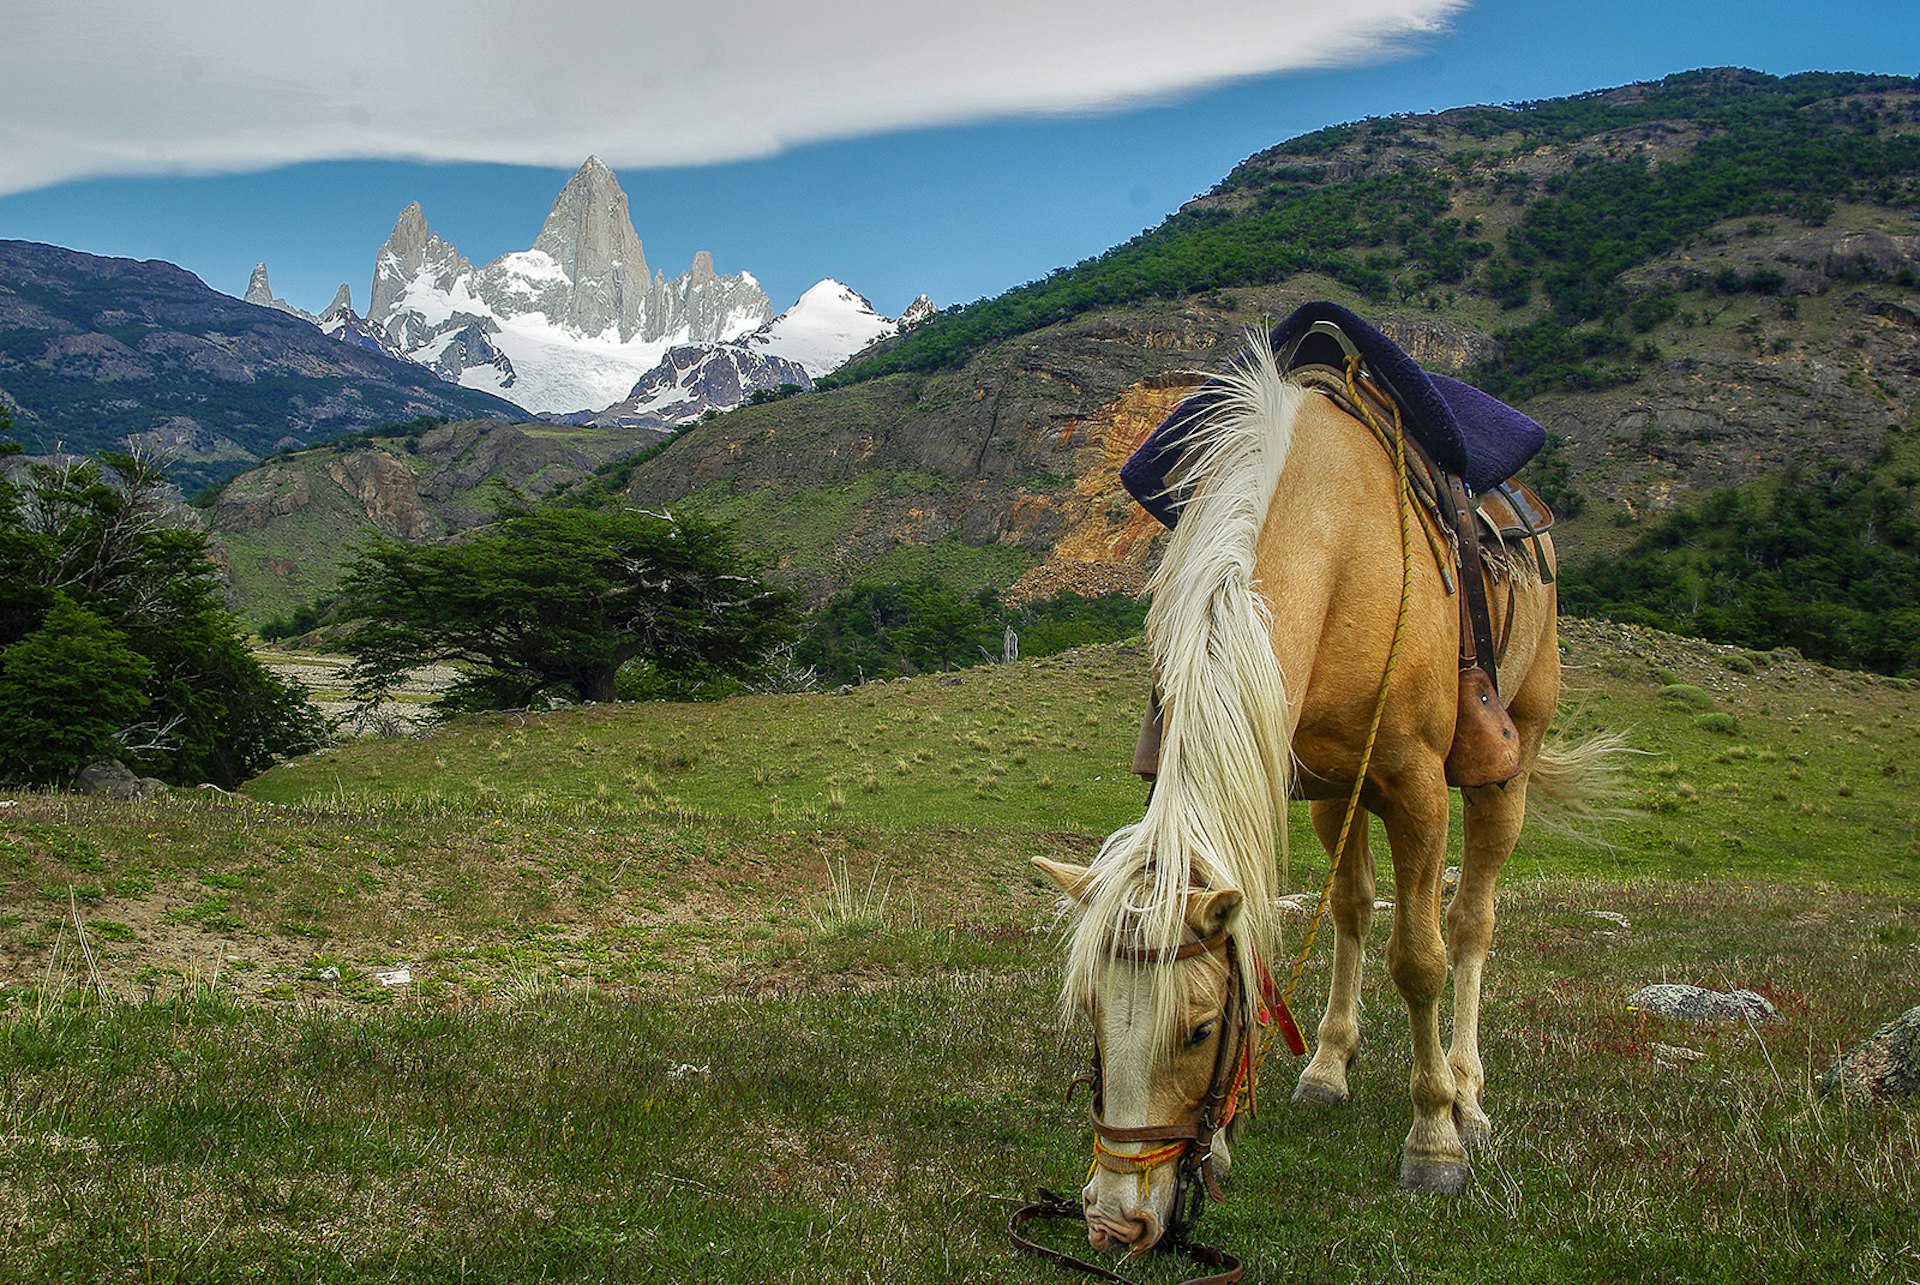 A tan horse with a white mane munches on grass in a field in front of Patagonian mountain peaks